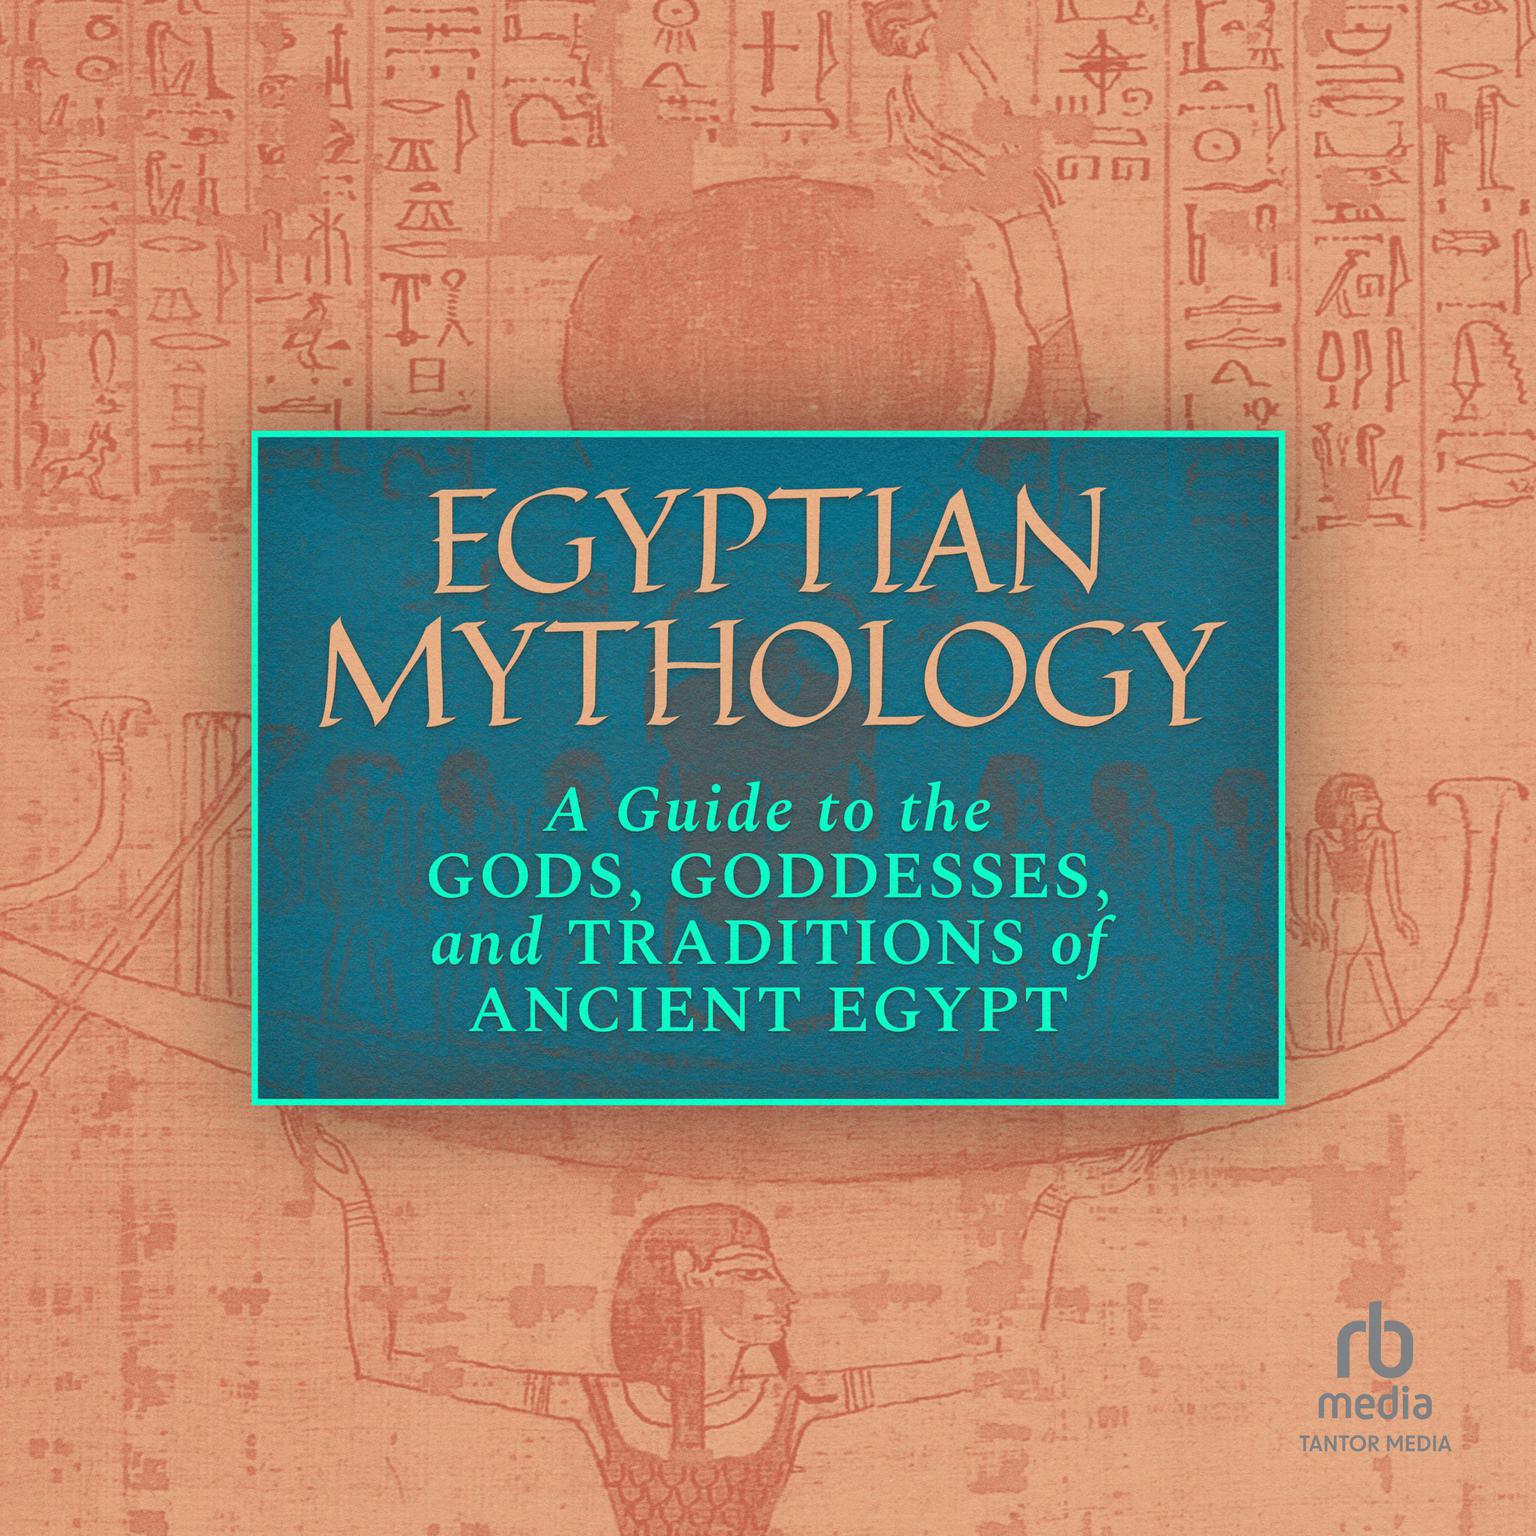 Egyptian Mythology: A Guide to the Gods, Goddesses, and Traditions of Ancient Egypt Audiobook, by Geraldine Pinch